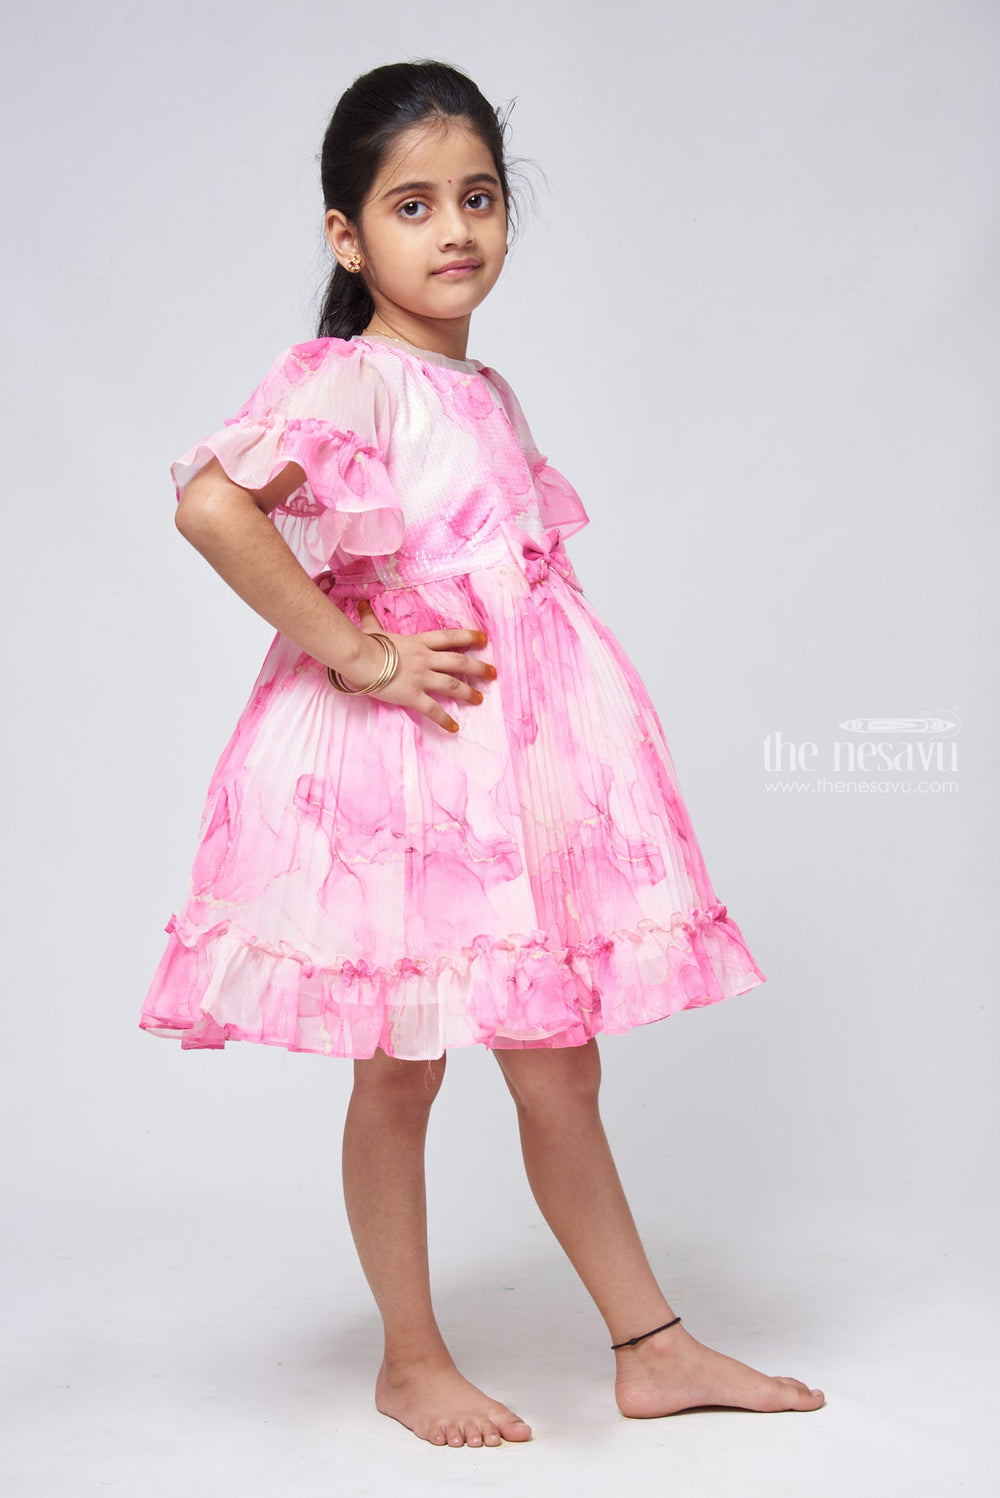 The Nesavu Girls Fancy Frock Girls Fancy Georgette Frock with Elegant Detailing and Lace Trims Nesavu Designer Girls Party Dress - Perfect For Photoshoots | The Nesavu